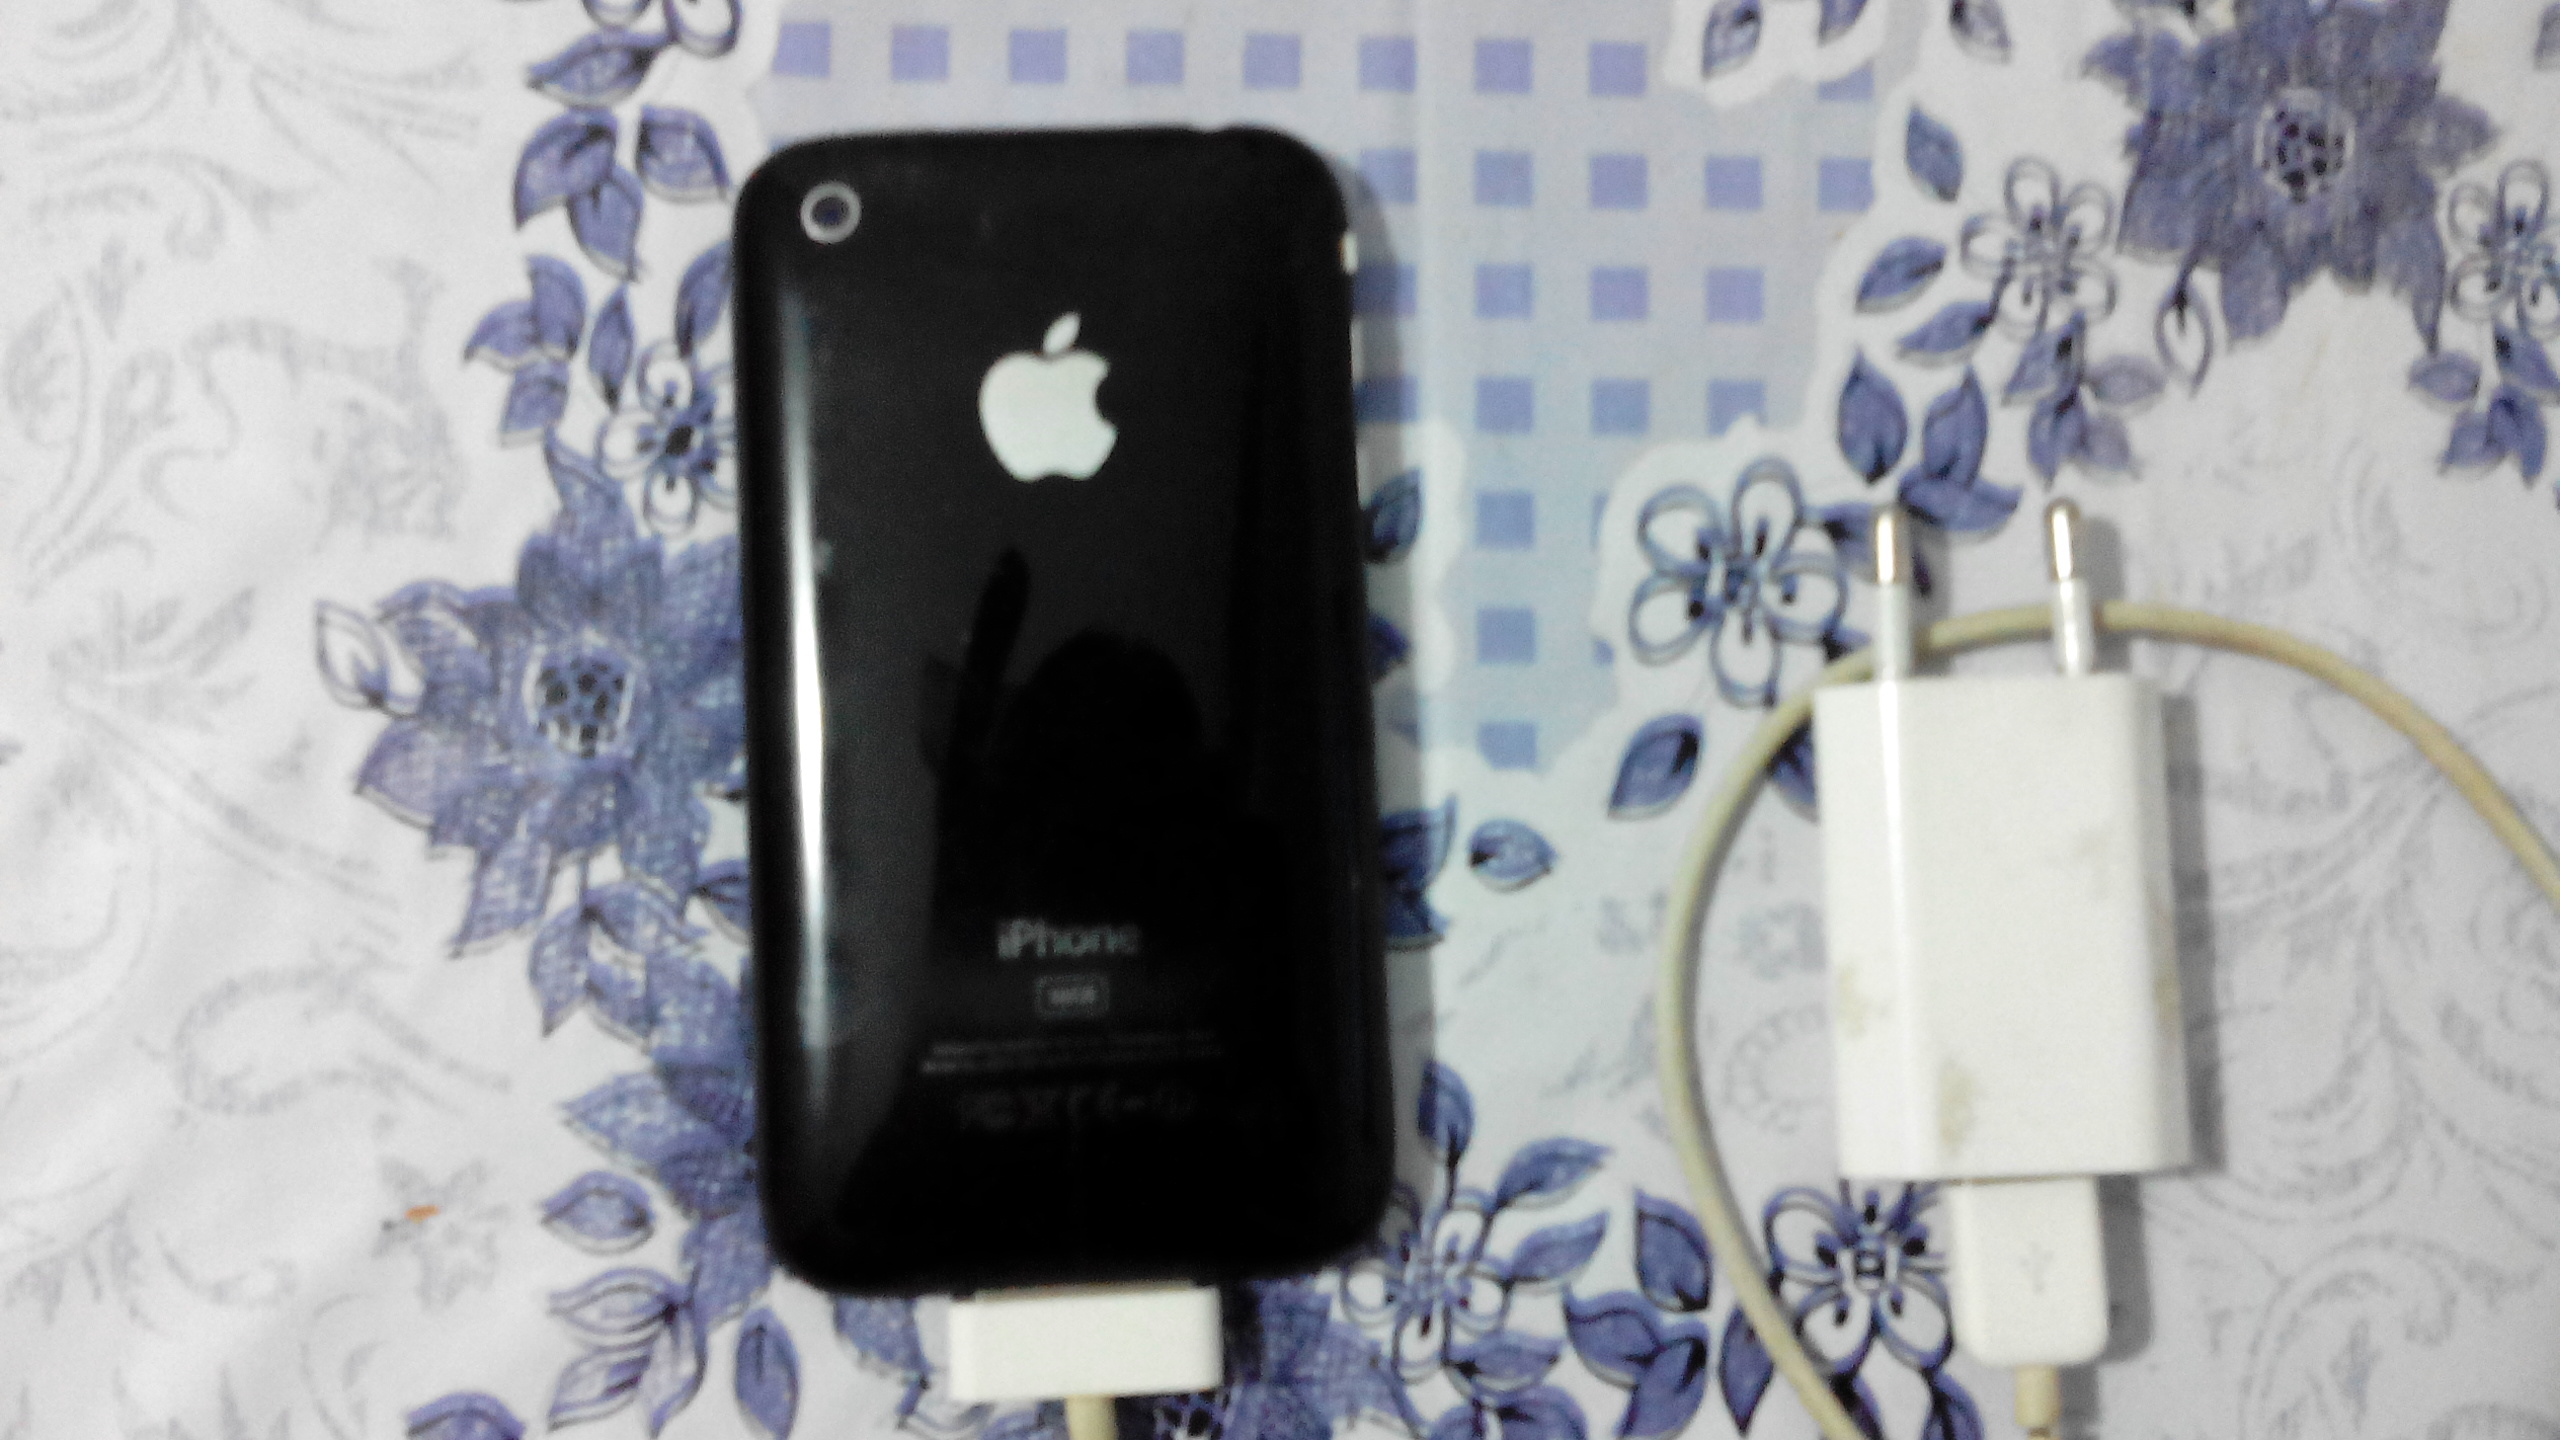 Apple Iphone 3Gs for Rs. 4000 only